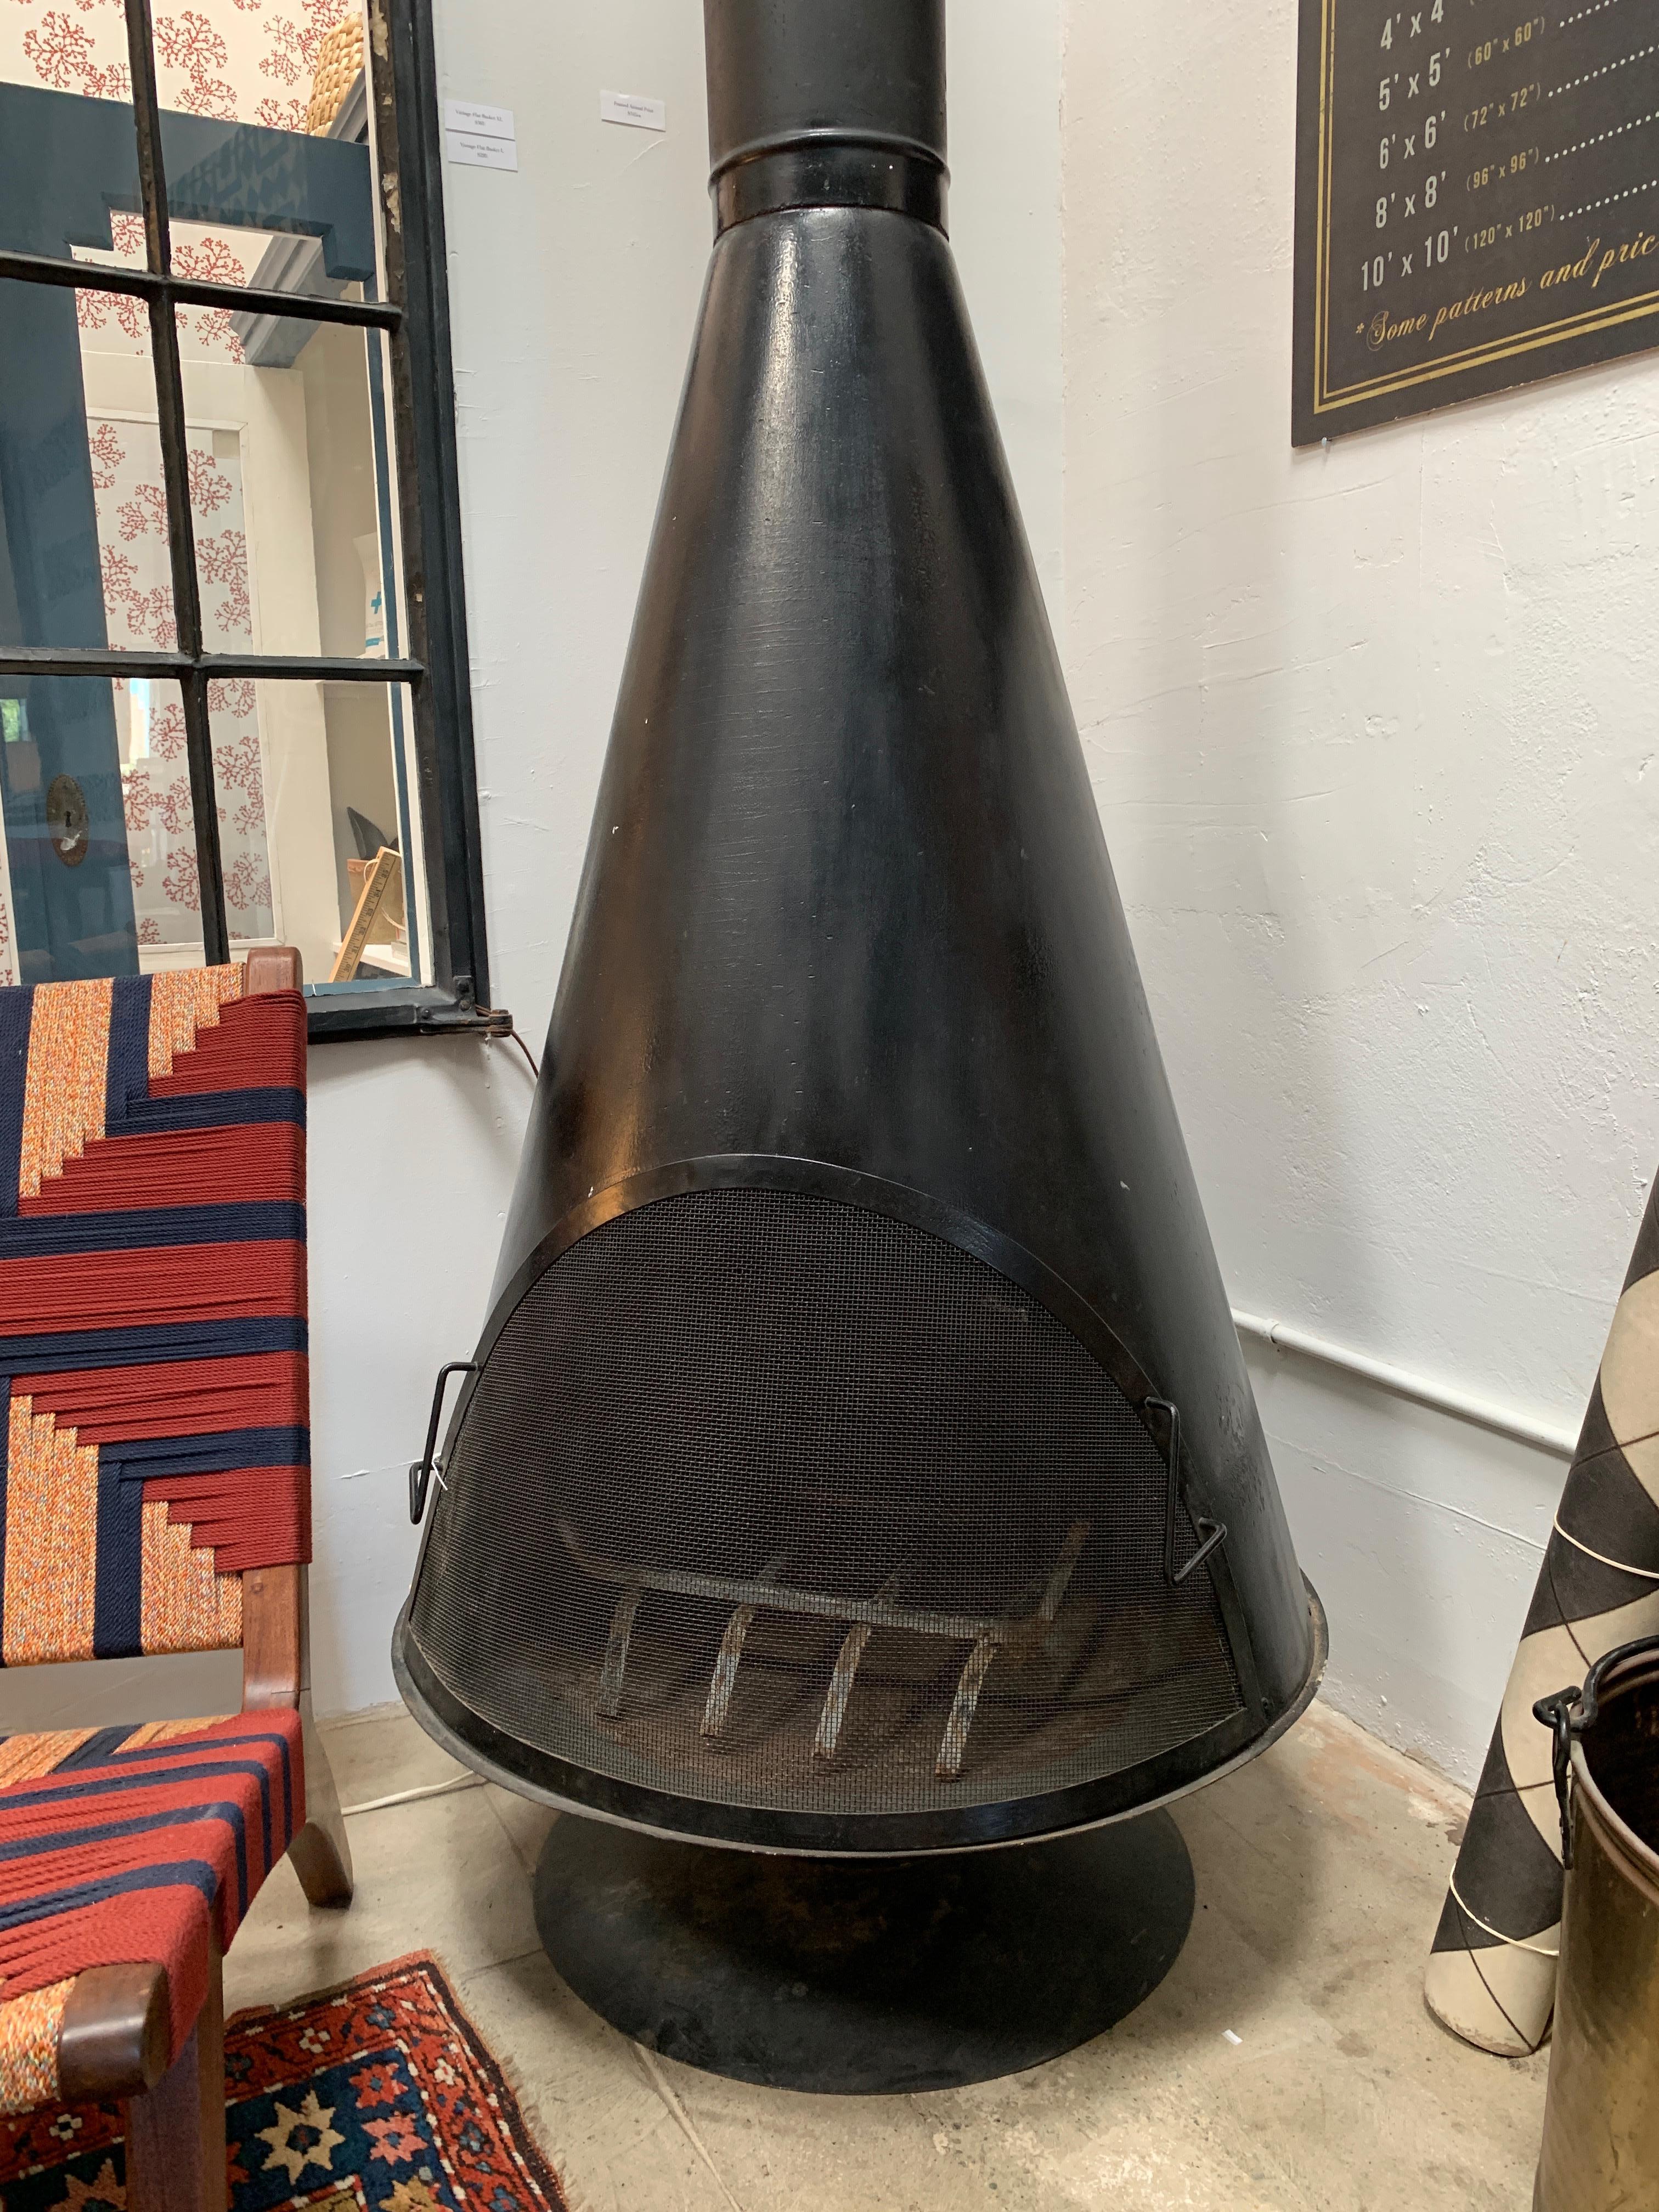 A beautiful vintage black Malm fireplace that can be used indoors or outdoors. Removable screen makes for easy wood loading and the sleek, timeless Scandinavian design makes it an effortless addition to any space.